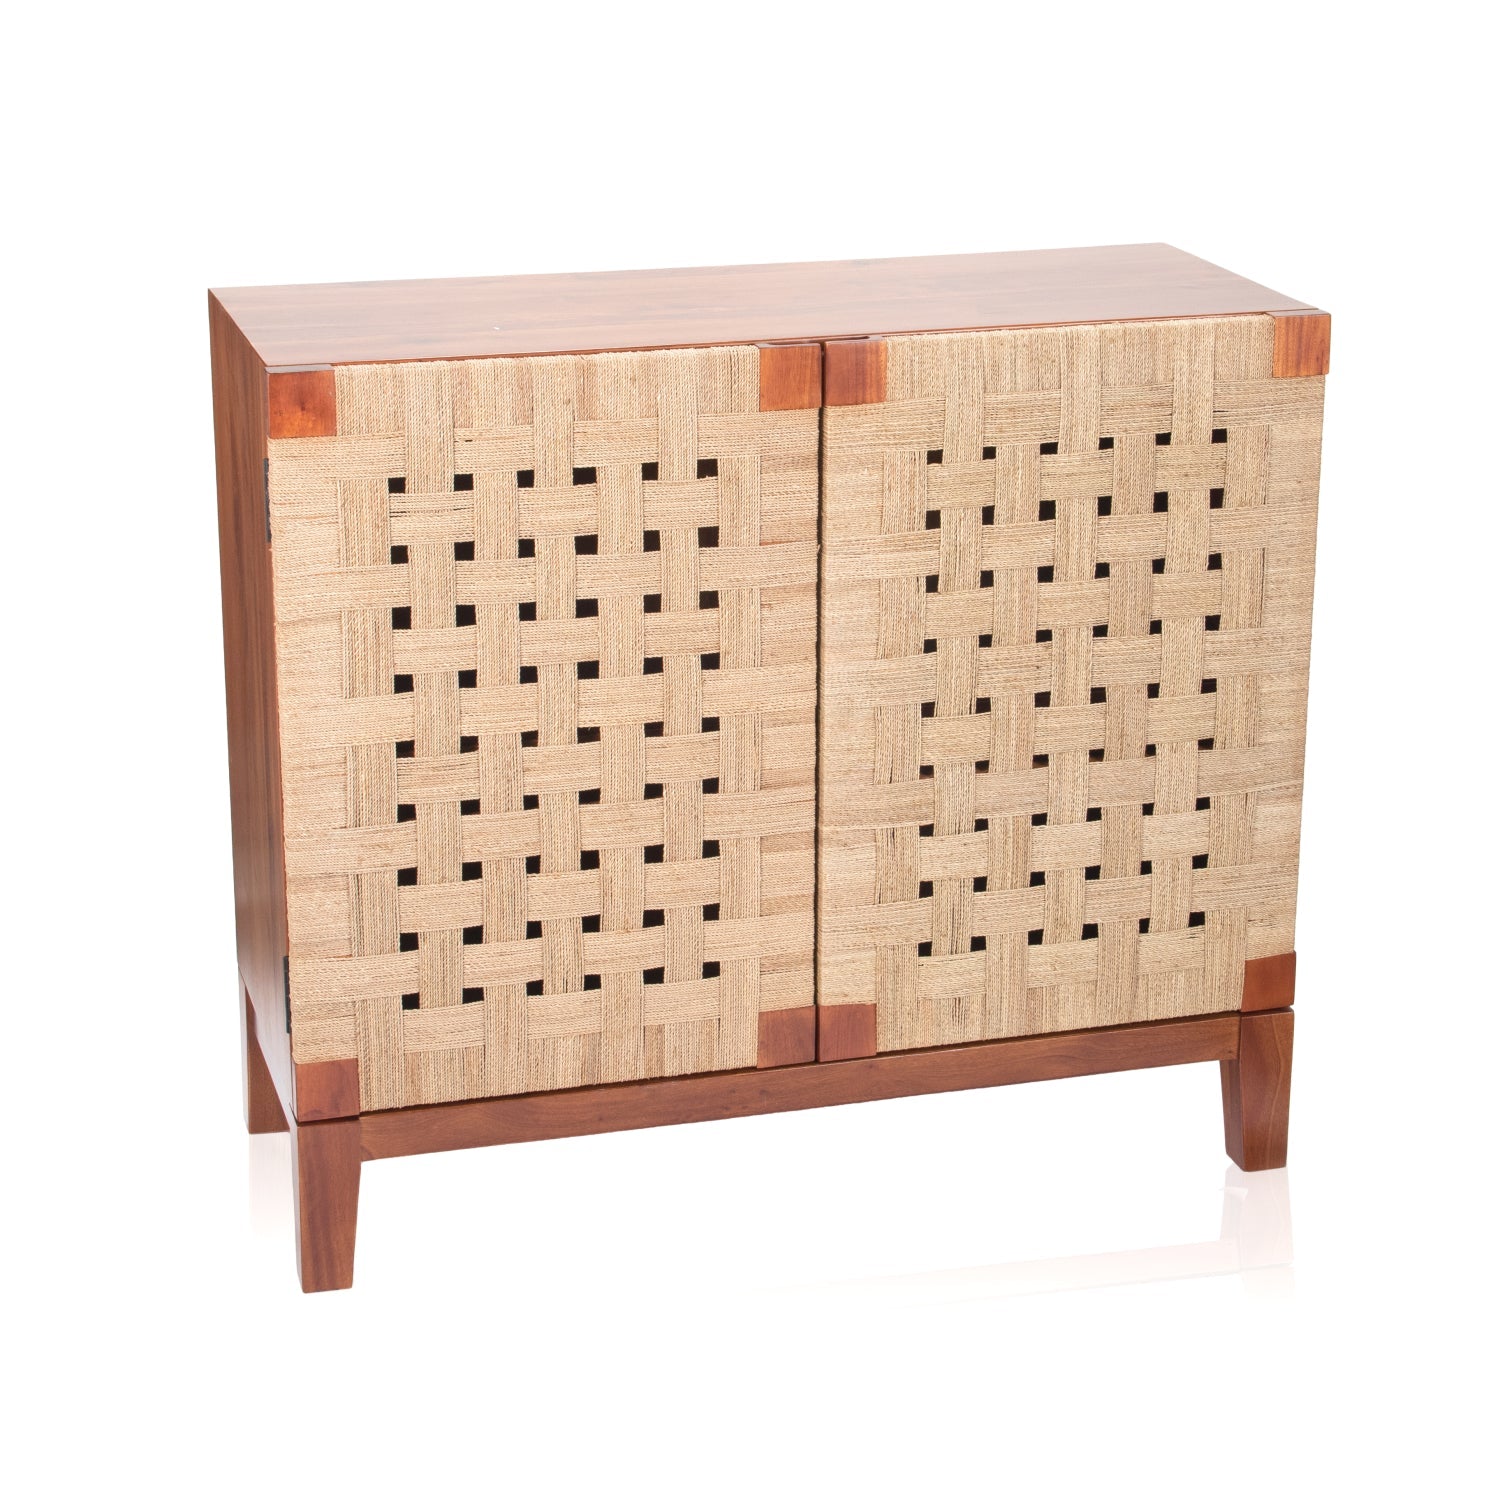 Pier 1 Diego Woven Seagrass 2 Door Cabinet - The Home Resolution